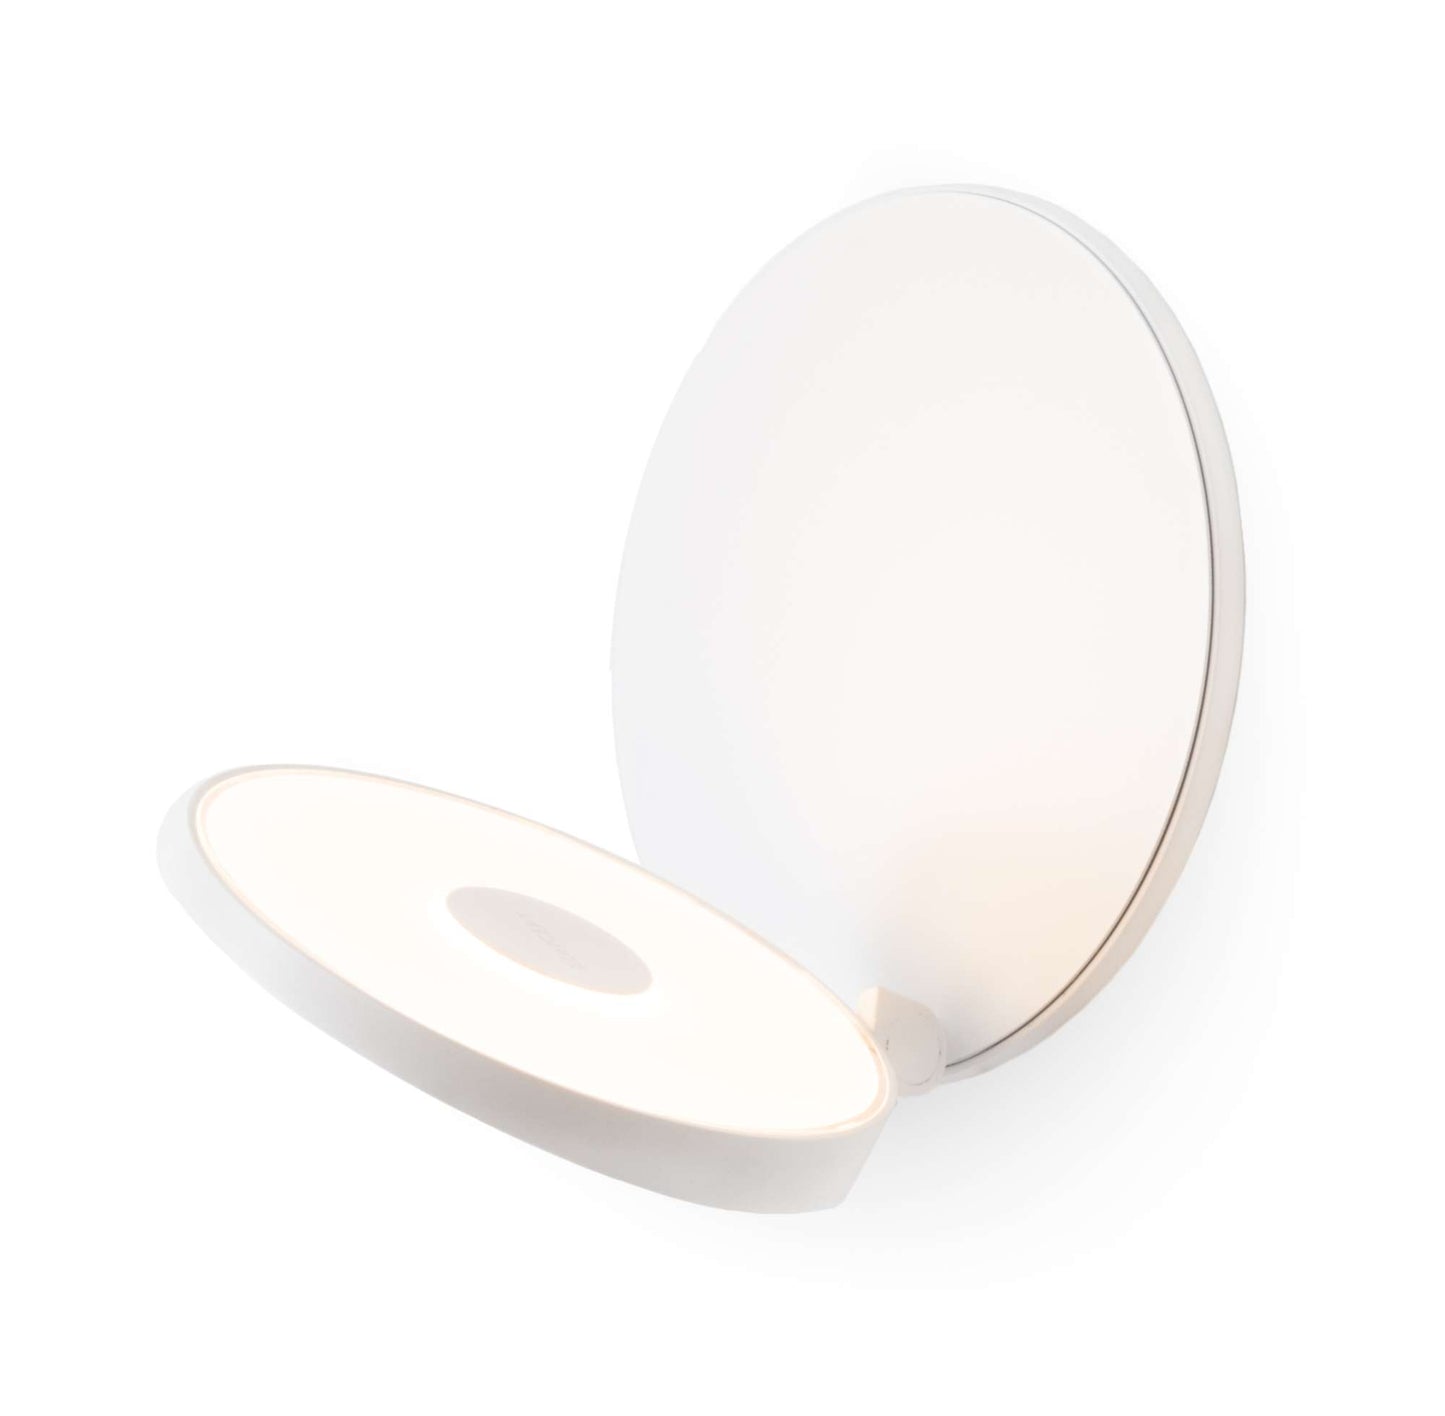 Koncept Gravy LED Wall Sconce - Plug-in